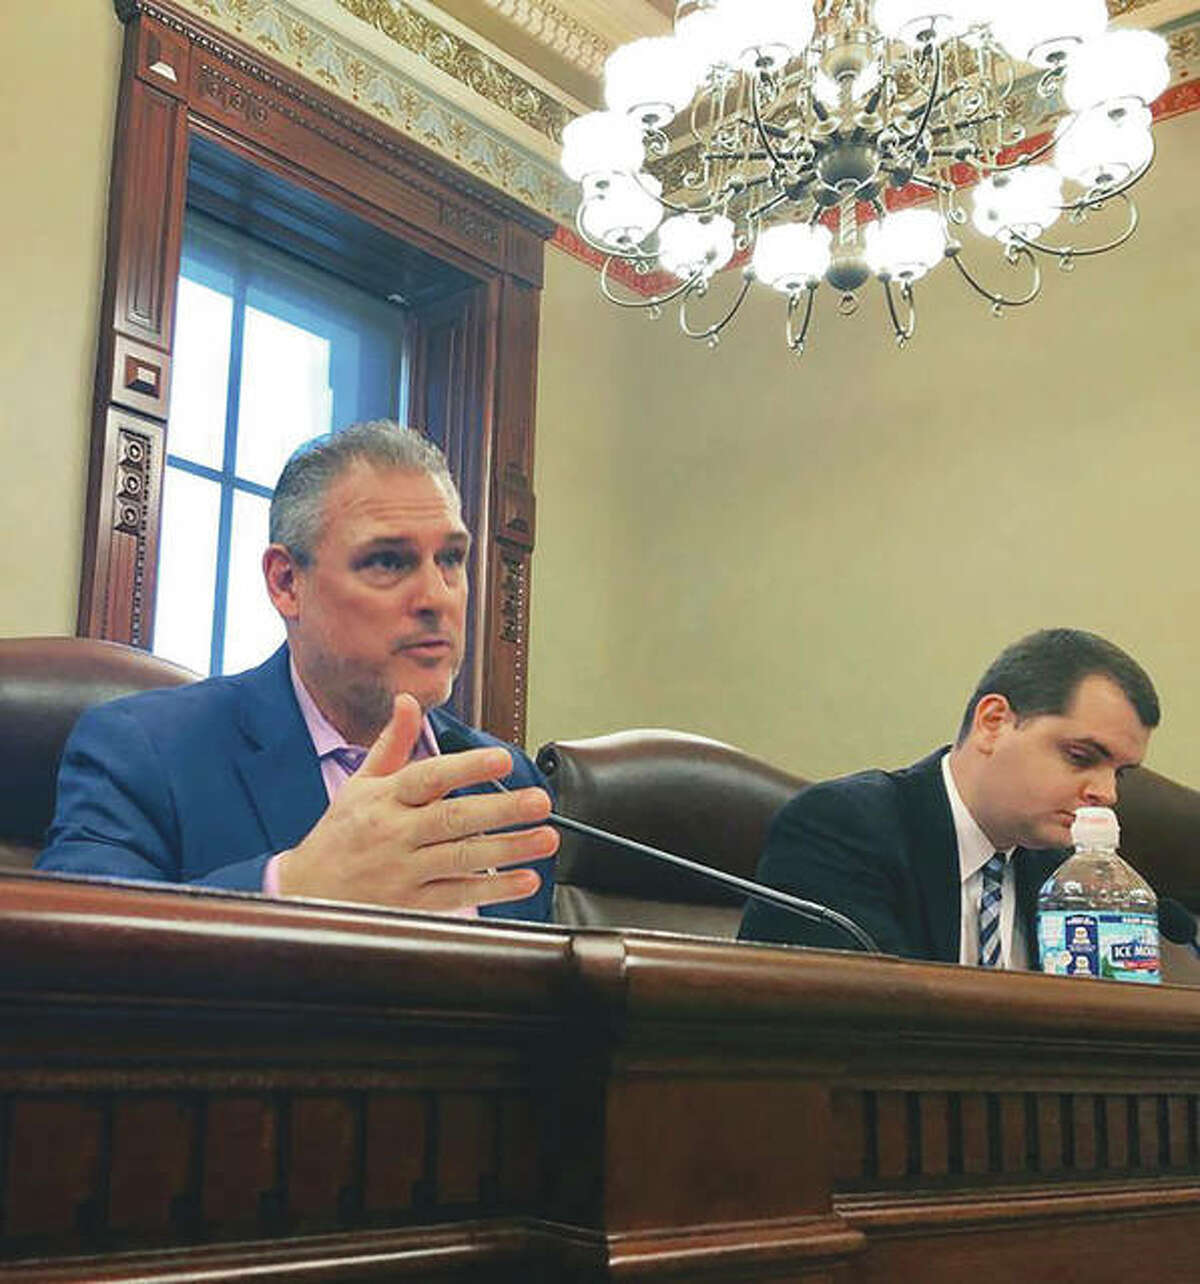 State Rep. Keith Wheeler, an Oswego Republican, asks questions during a 2019 hearing in Springfield. He introduced a measure in the House to remove the statute of limitations on sex crimes in Illinois.